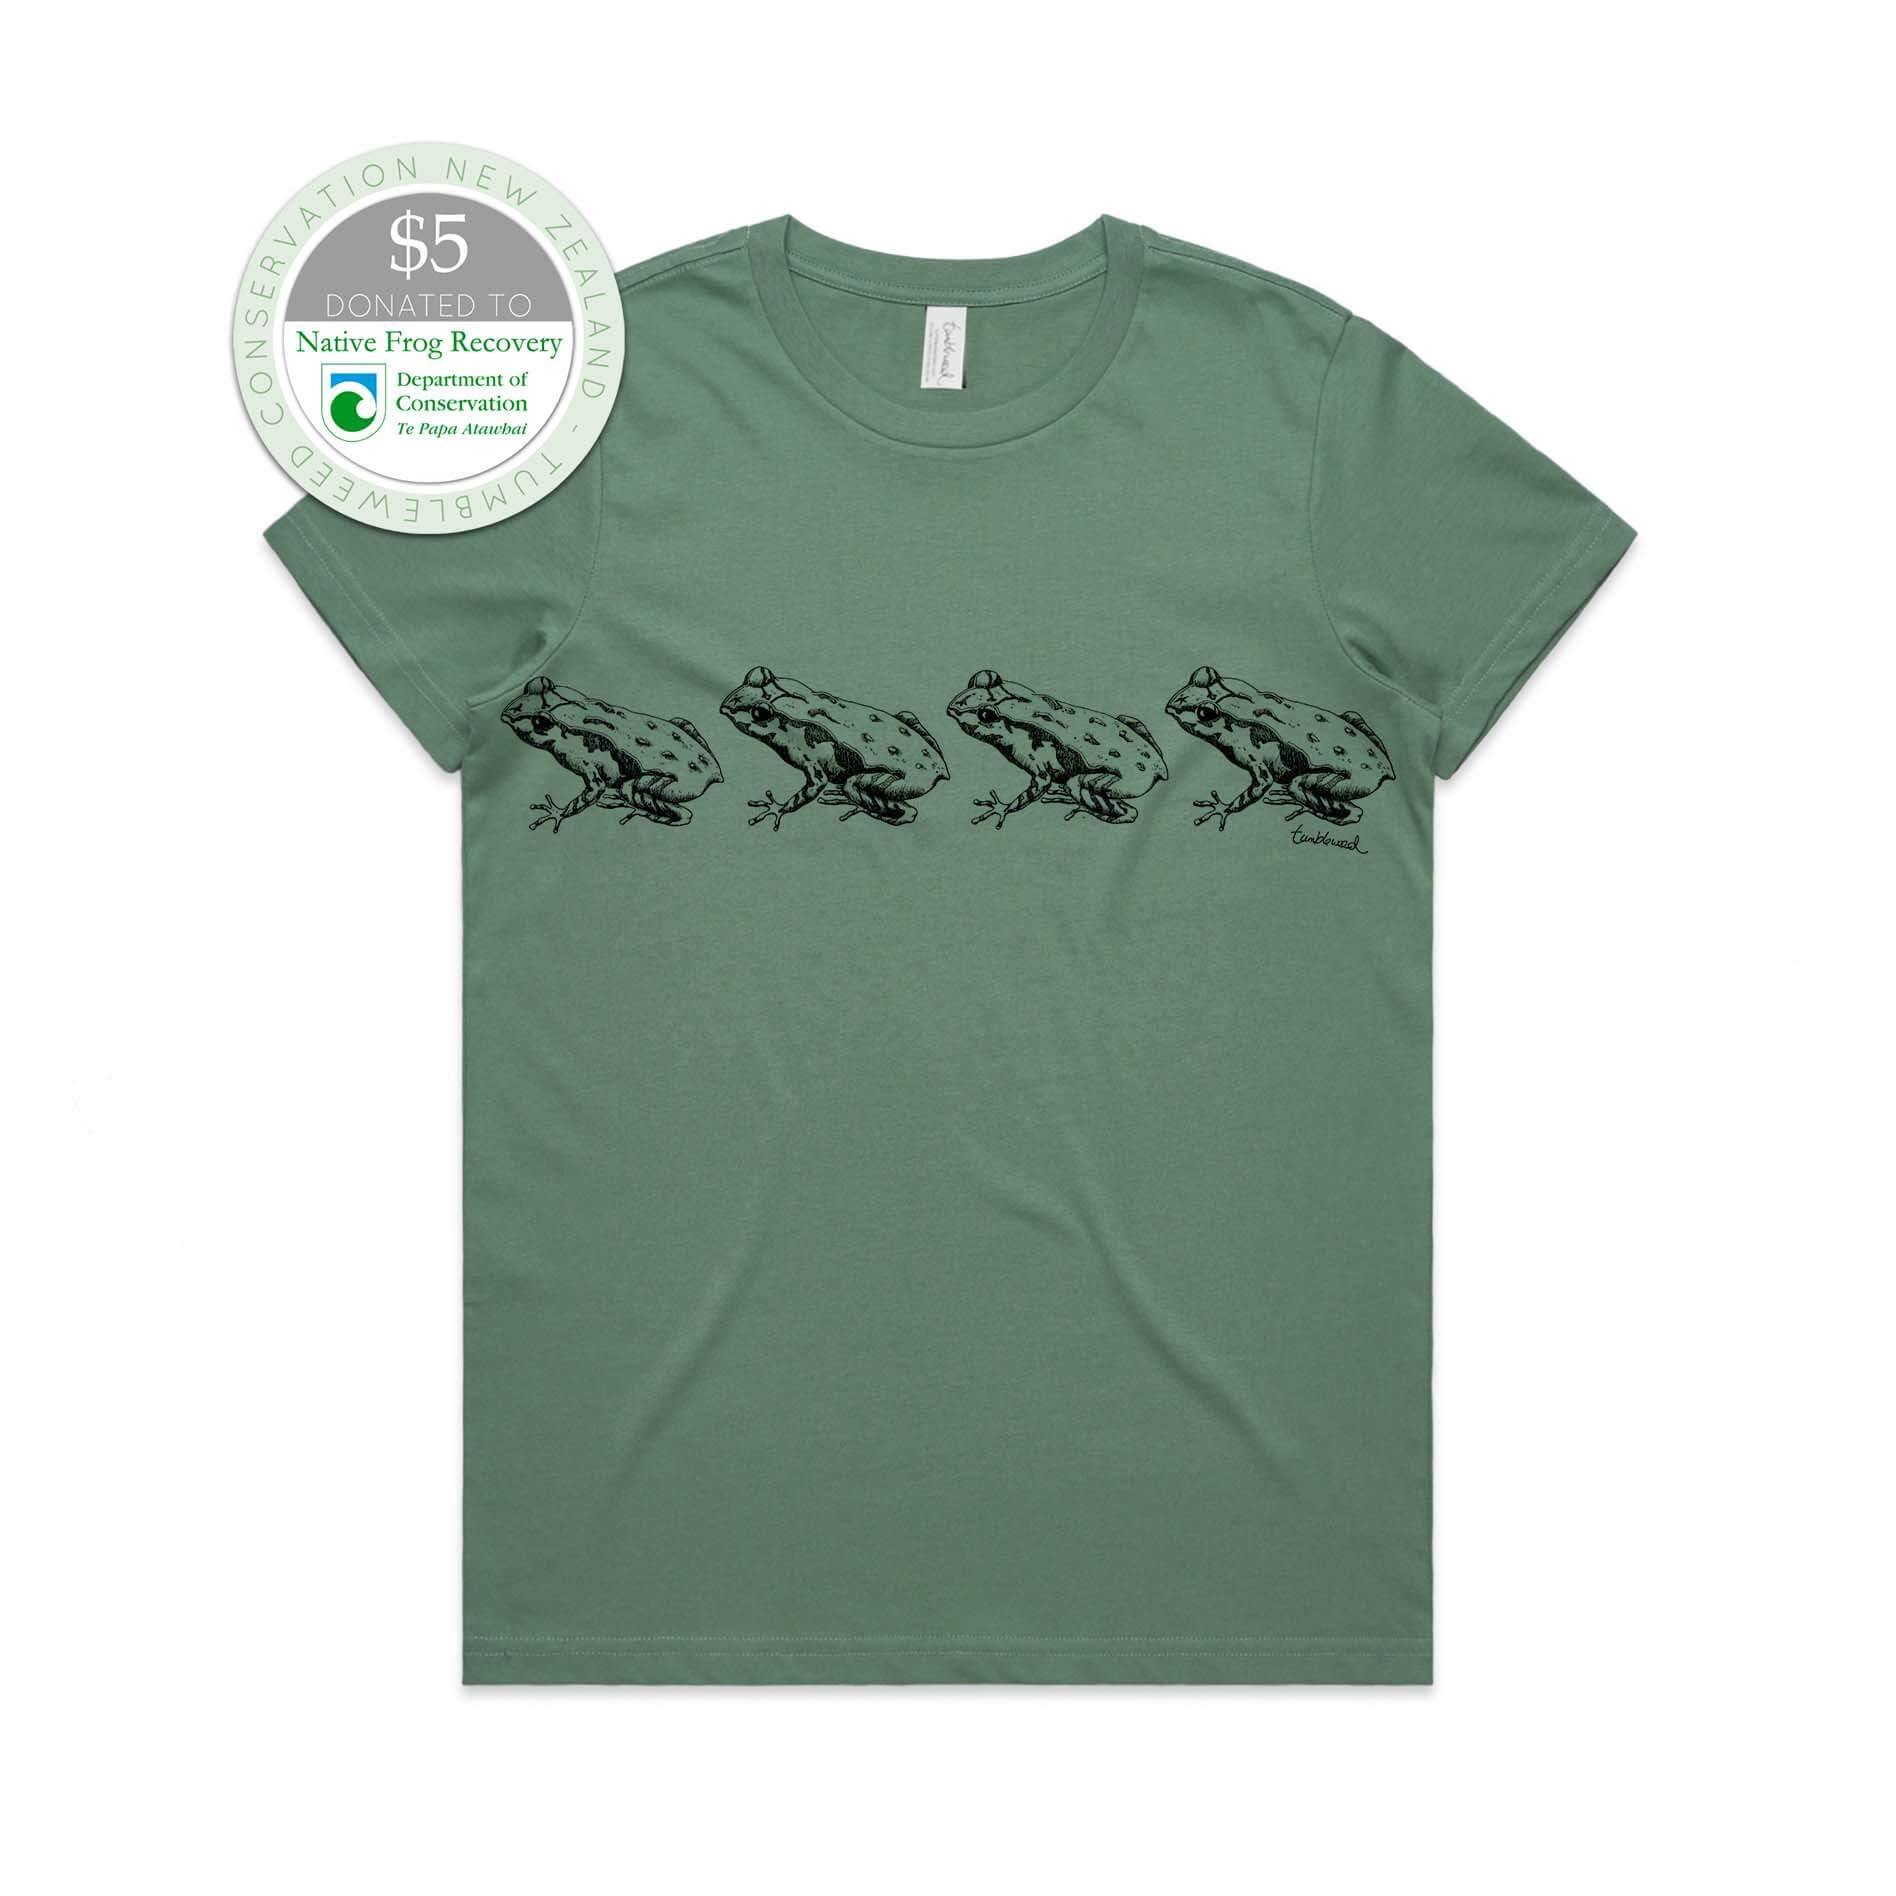 Sage, female t-shirt featuring a screen printed archey's frog design.